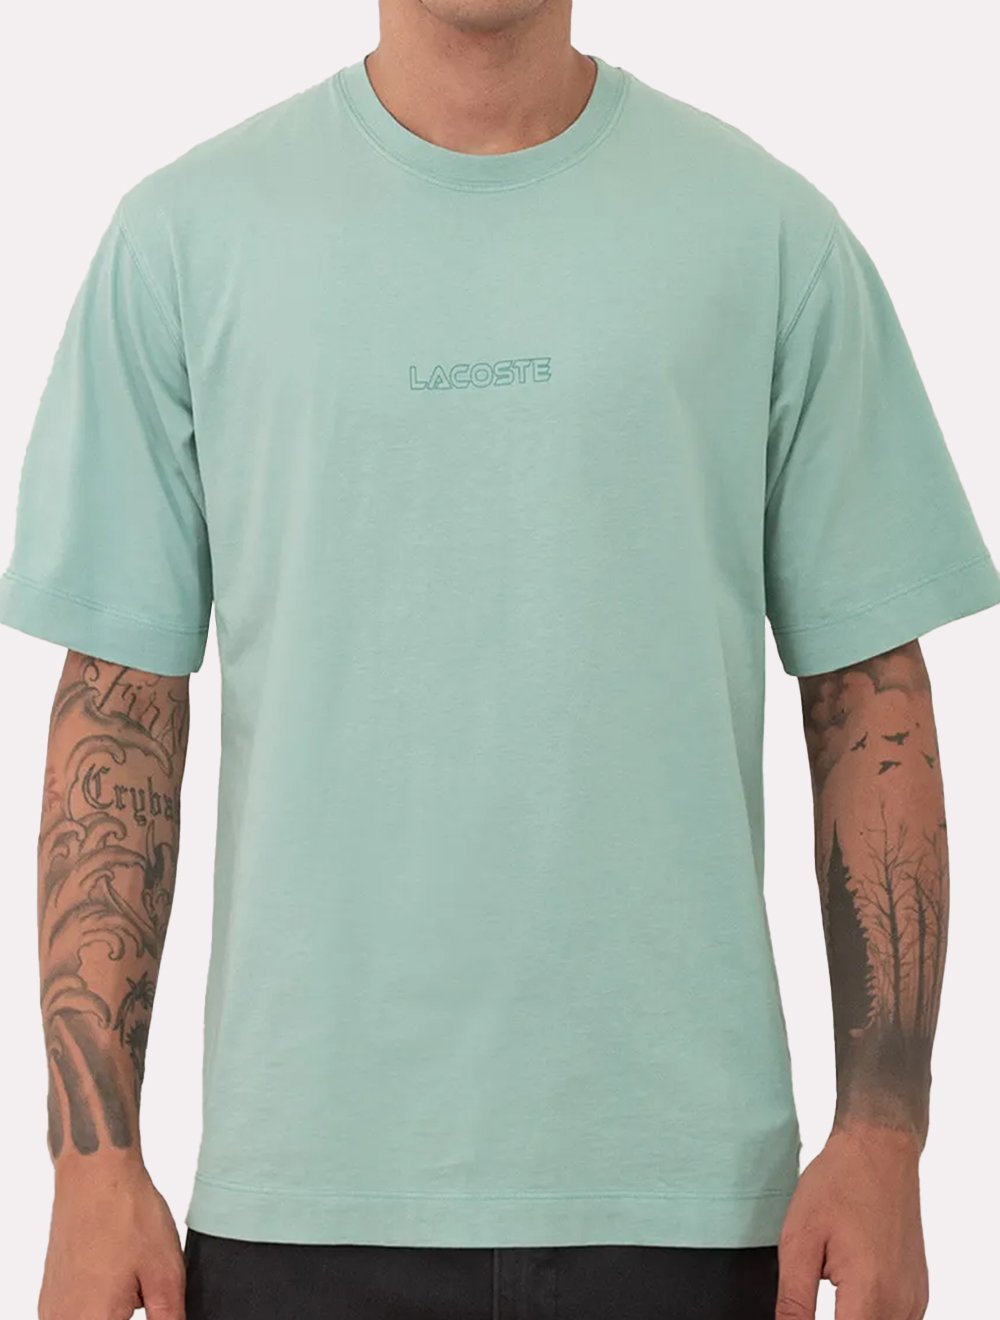 Camiseta Lacoste Masculina Loose Fit Summer Collection Verde Claro